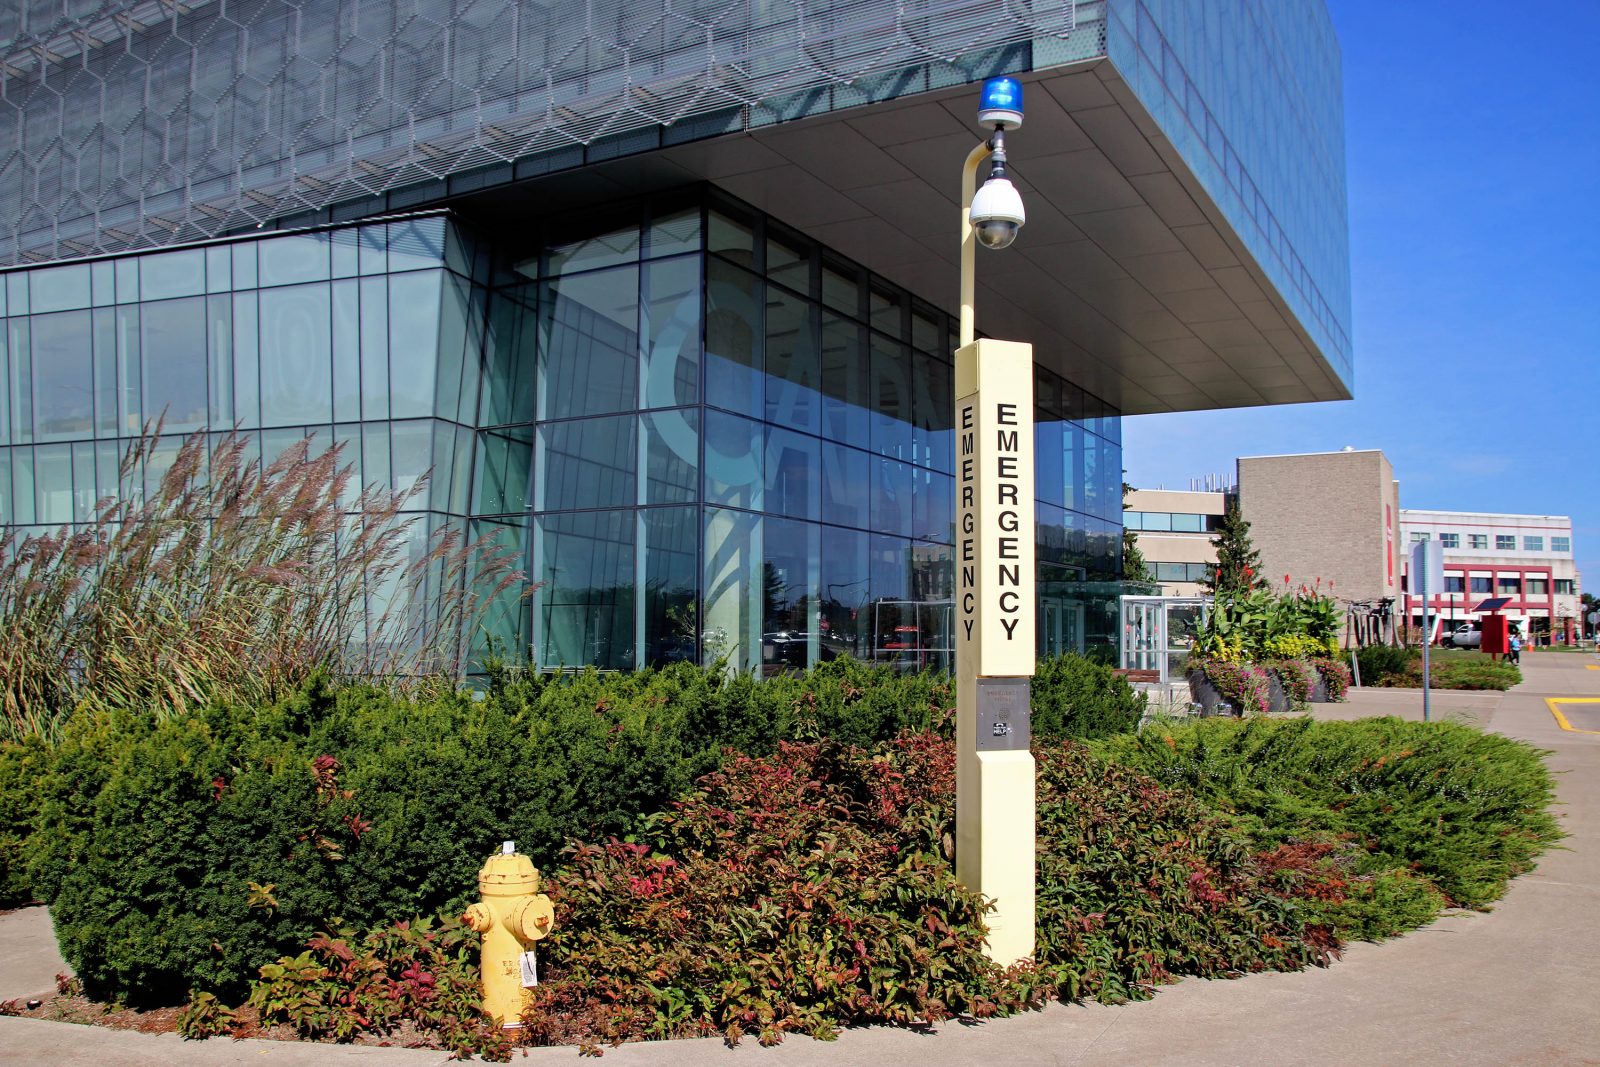 A large emergency phone — a tall yellow pole with “EMERGENCY” written on it and a security camera and blue light attached to the top — is seen in front of a large glass building with “CAIRNS” written on it. A fire hydrant is next to the phone, and other buildings can be seen in the background.